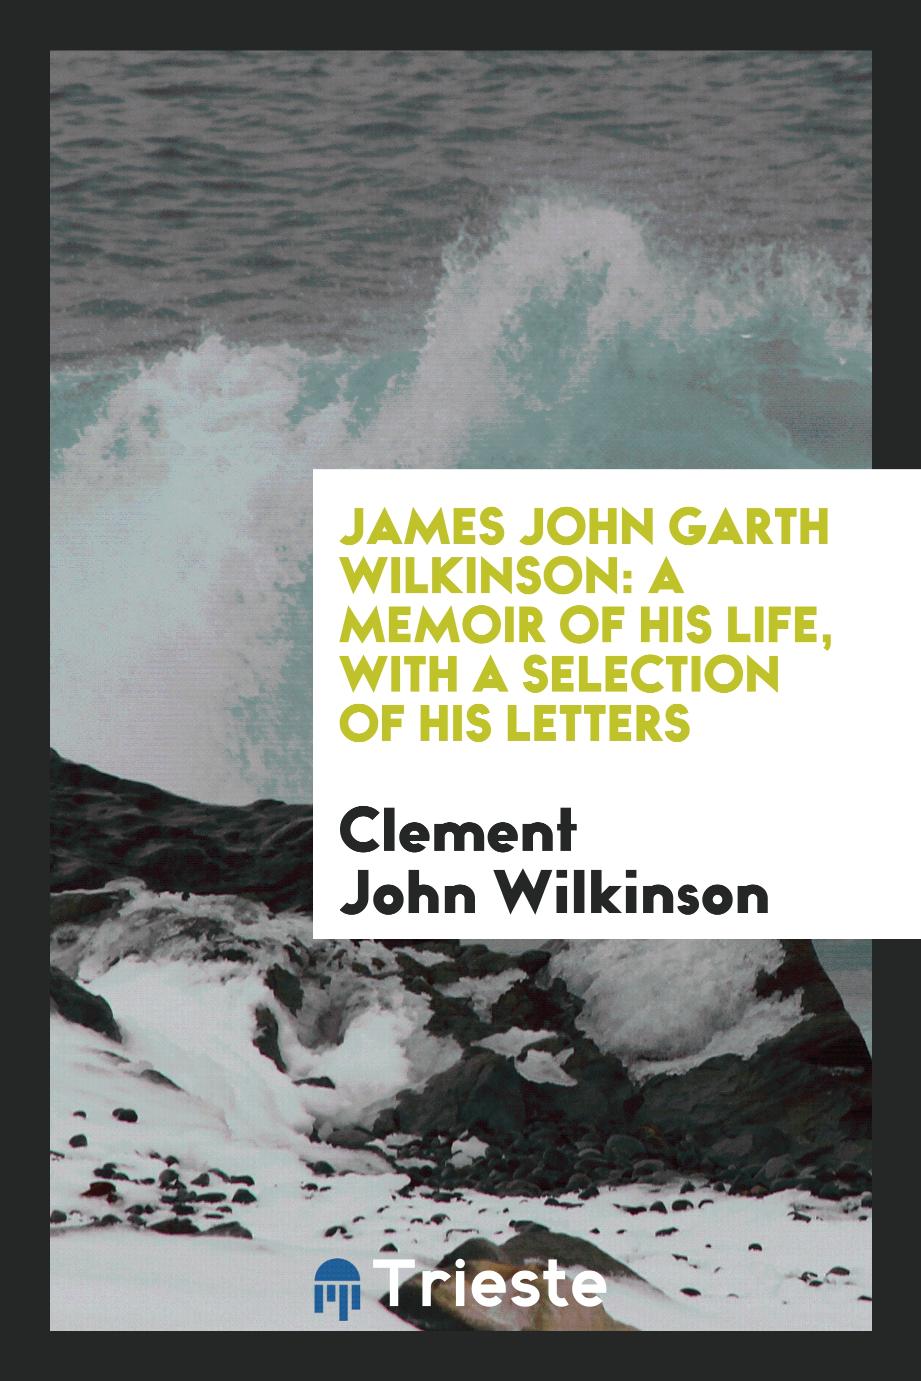 James John Garth Wilkinson: A Memoir of His Life, with a Selection of His Letters